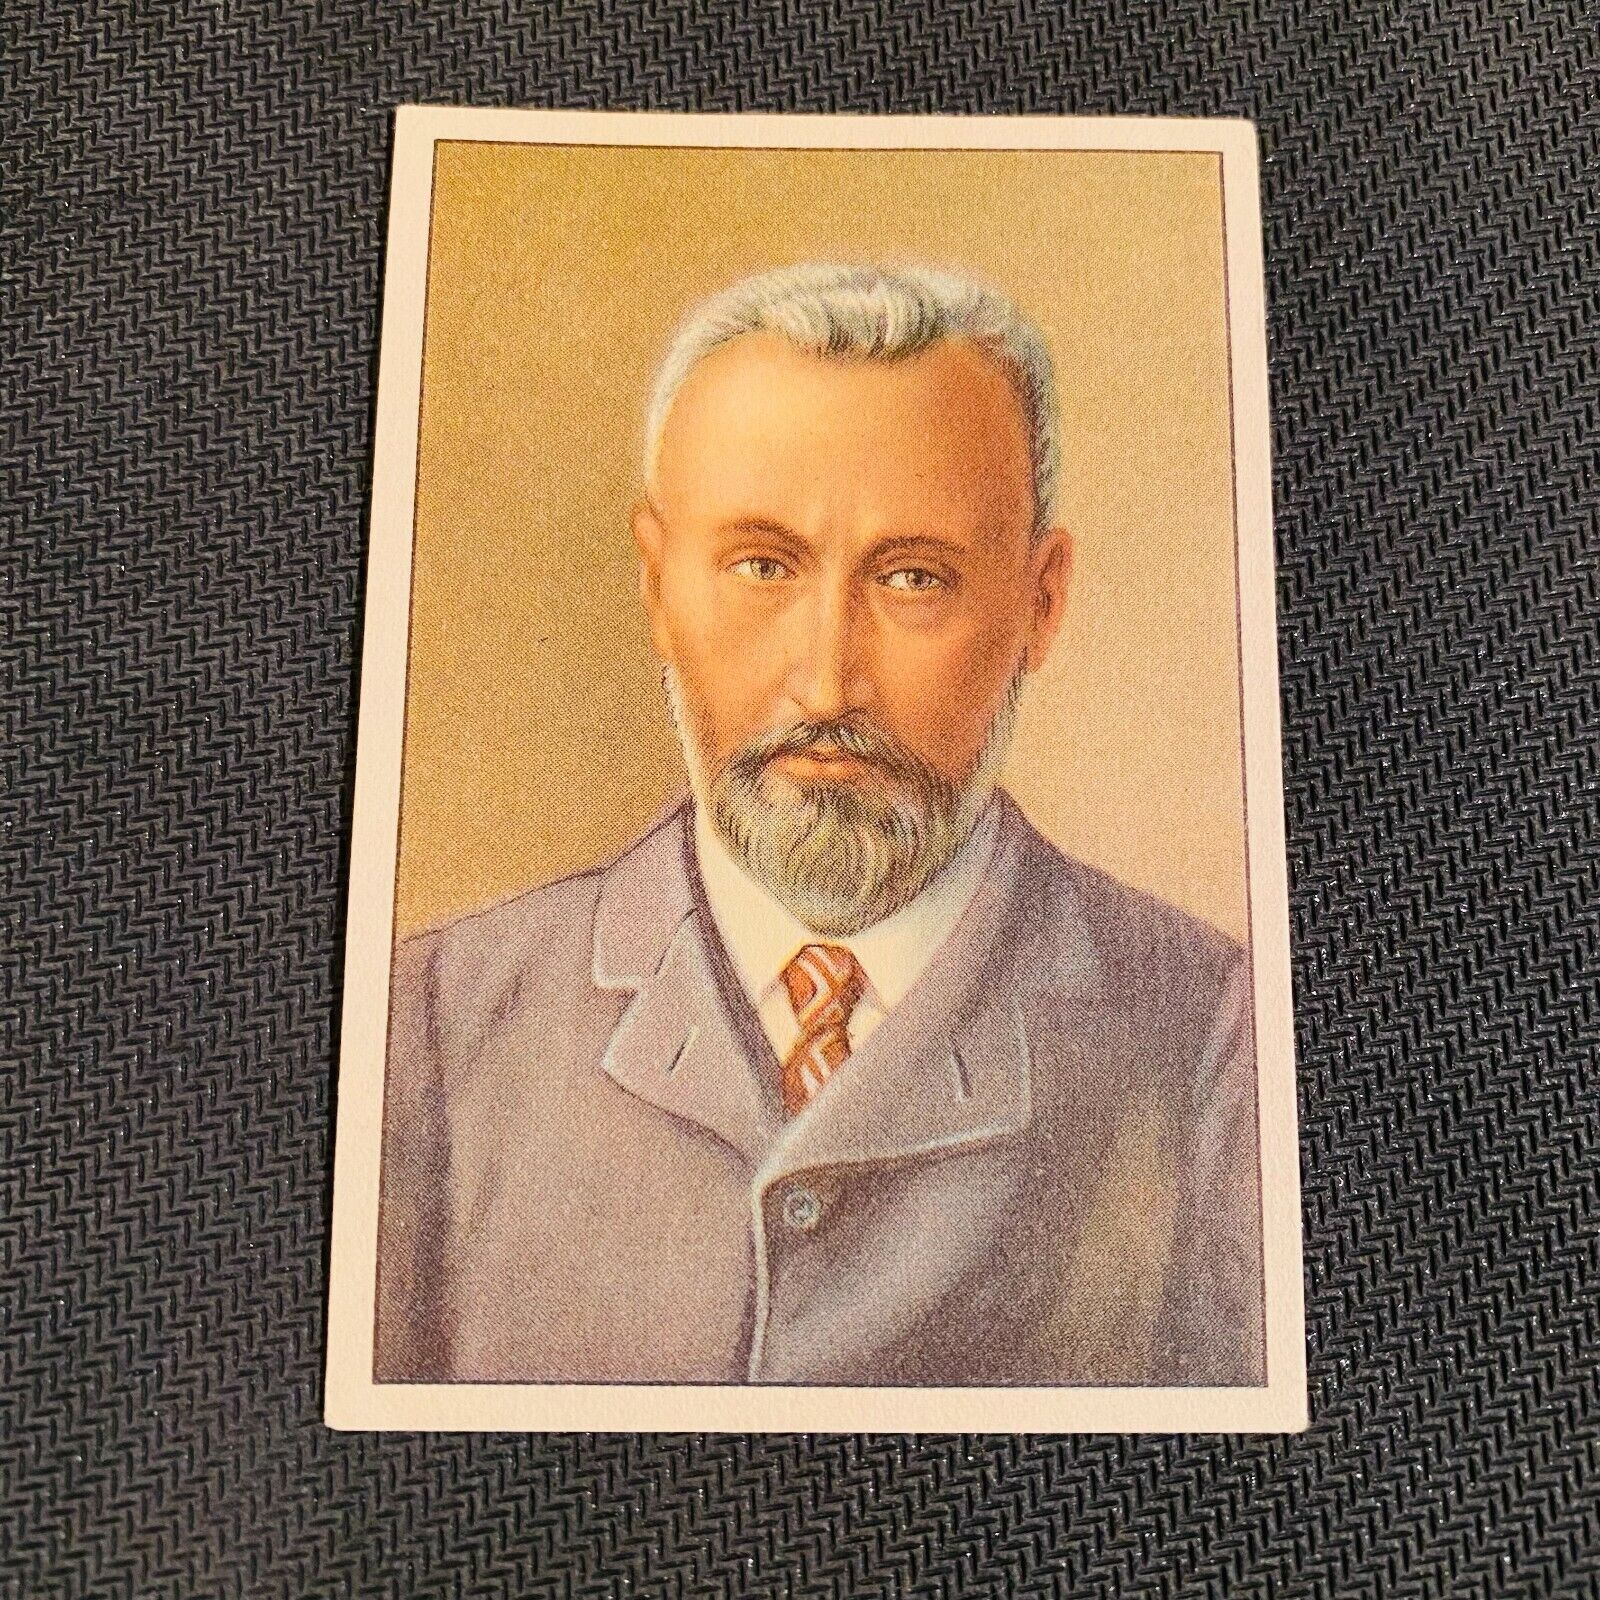 1938 Gutermann Trade Card #34 Pierre Curie Nobel Prize Marie Davy Medal Law 1859